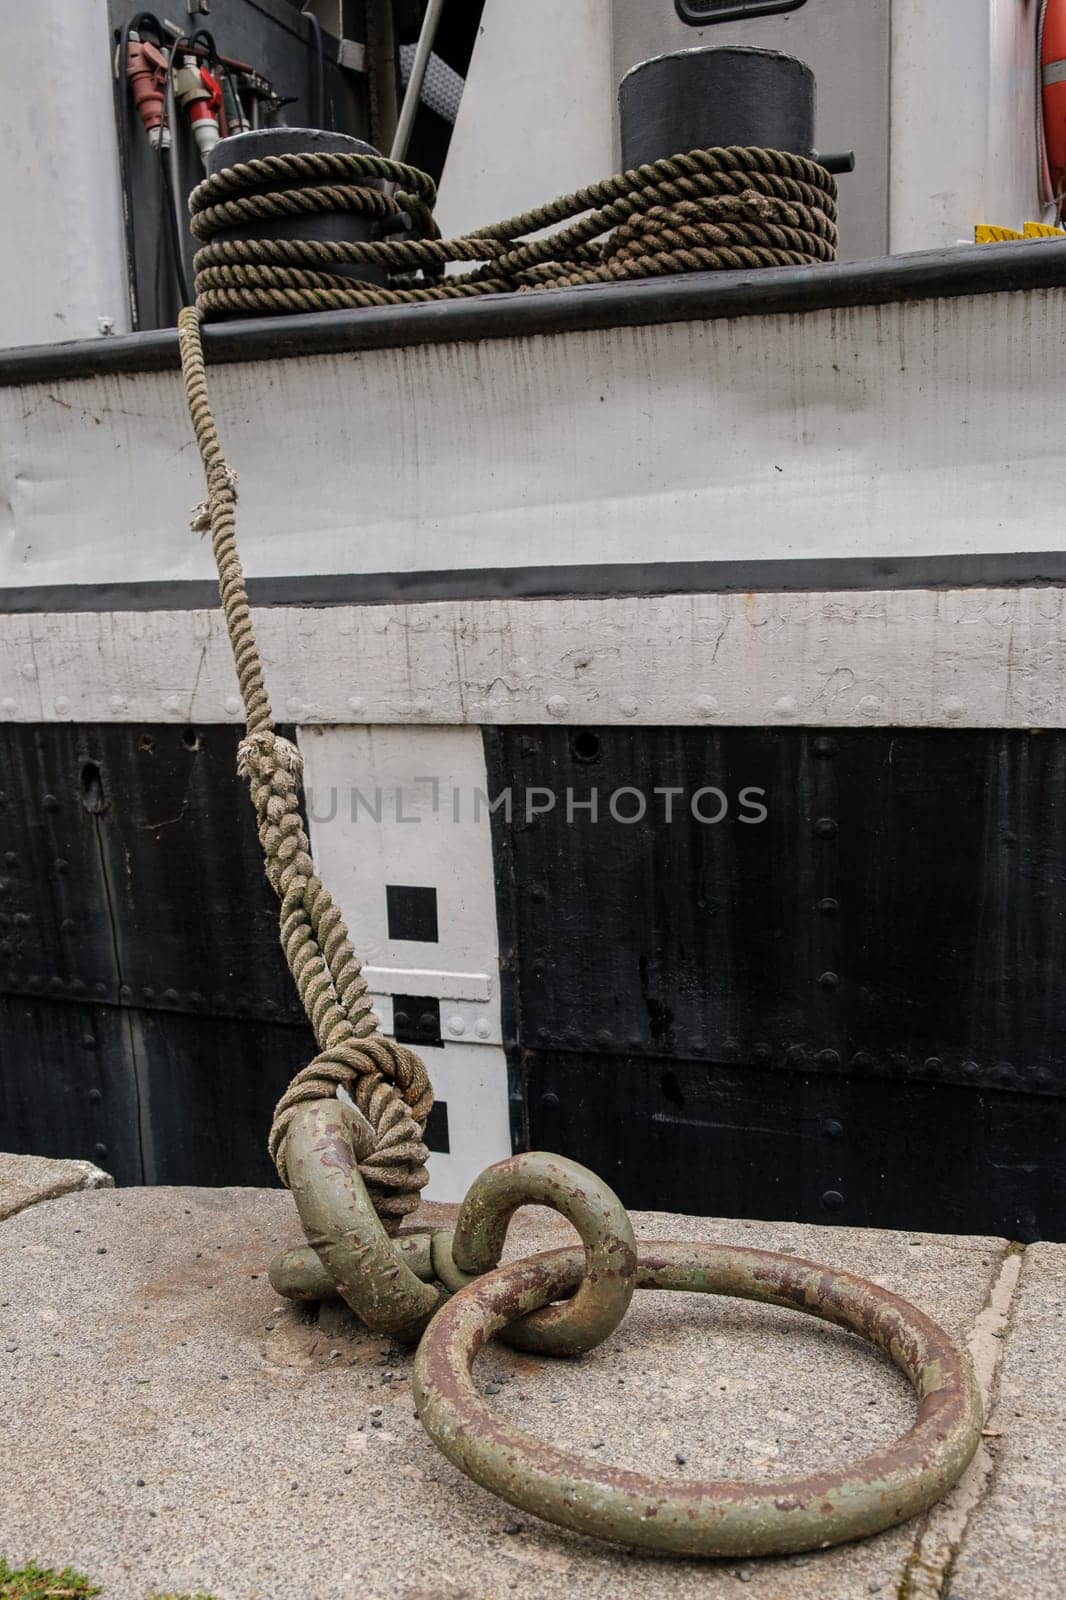 Ship or vessel moored on the embankment using tensioned rope and metal ring.